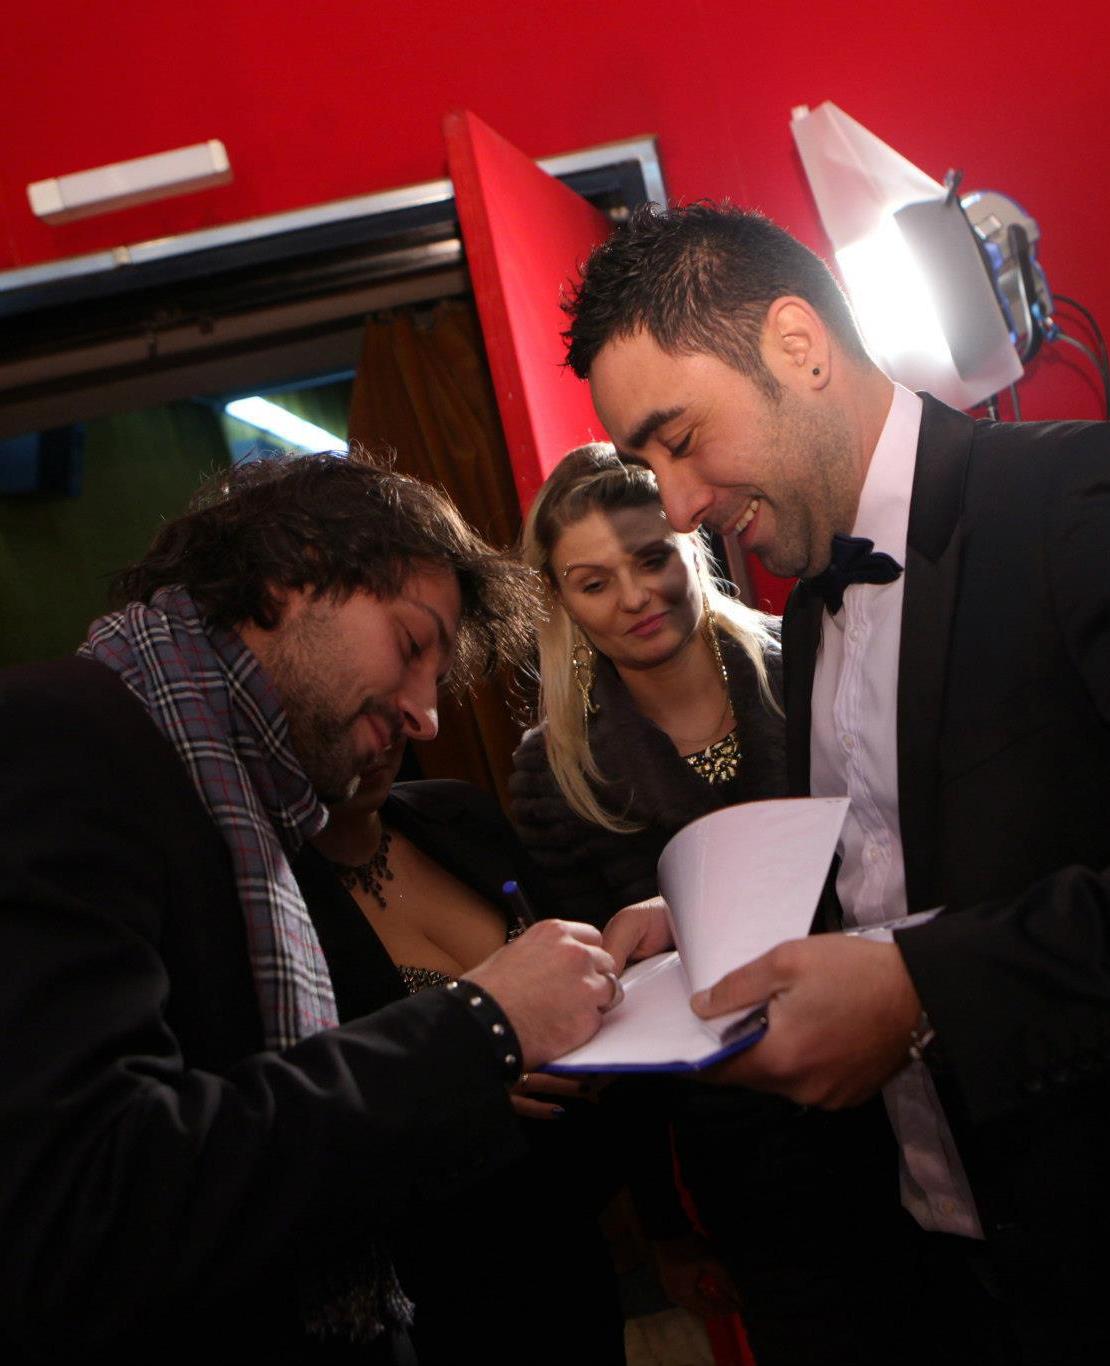 Dragos giving an autograph to a fan.